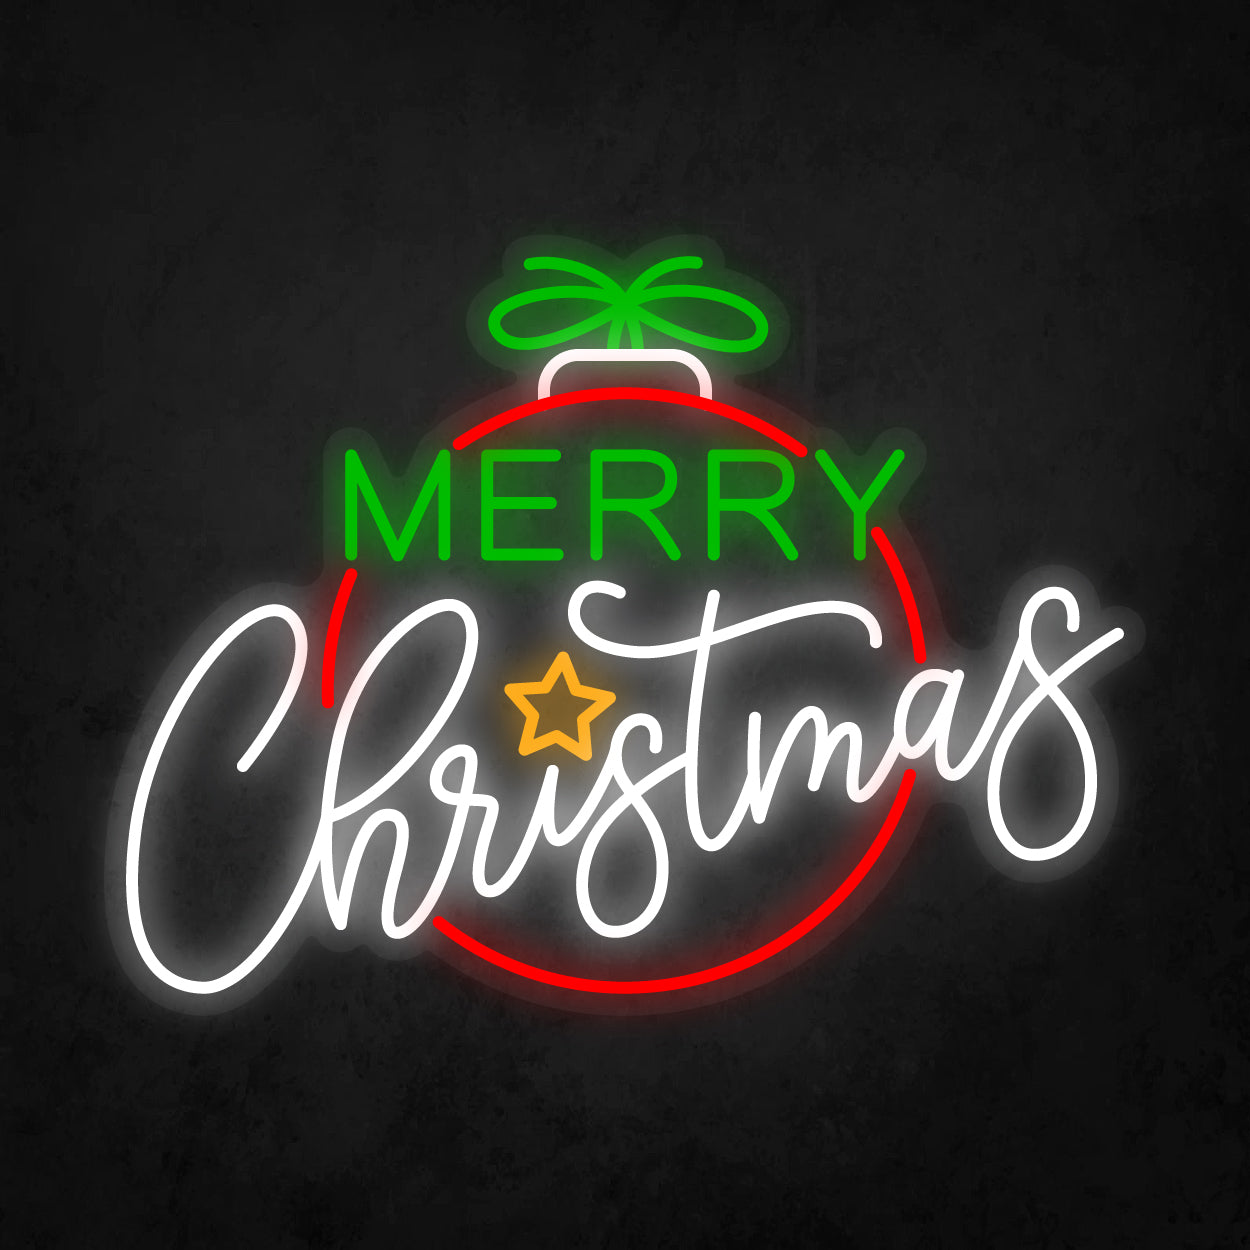 LED Neon Sign - Merry Christmas - Colorful